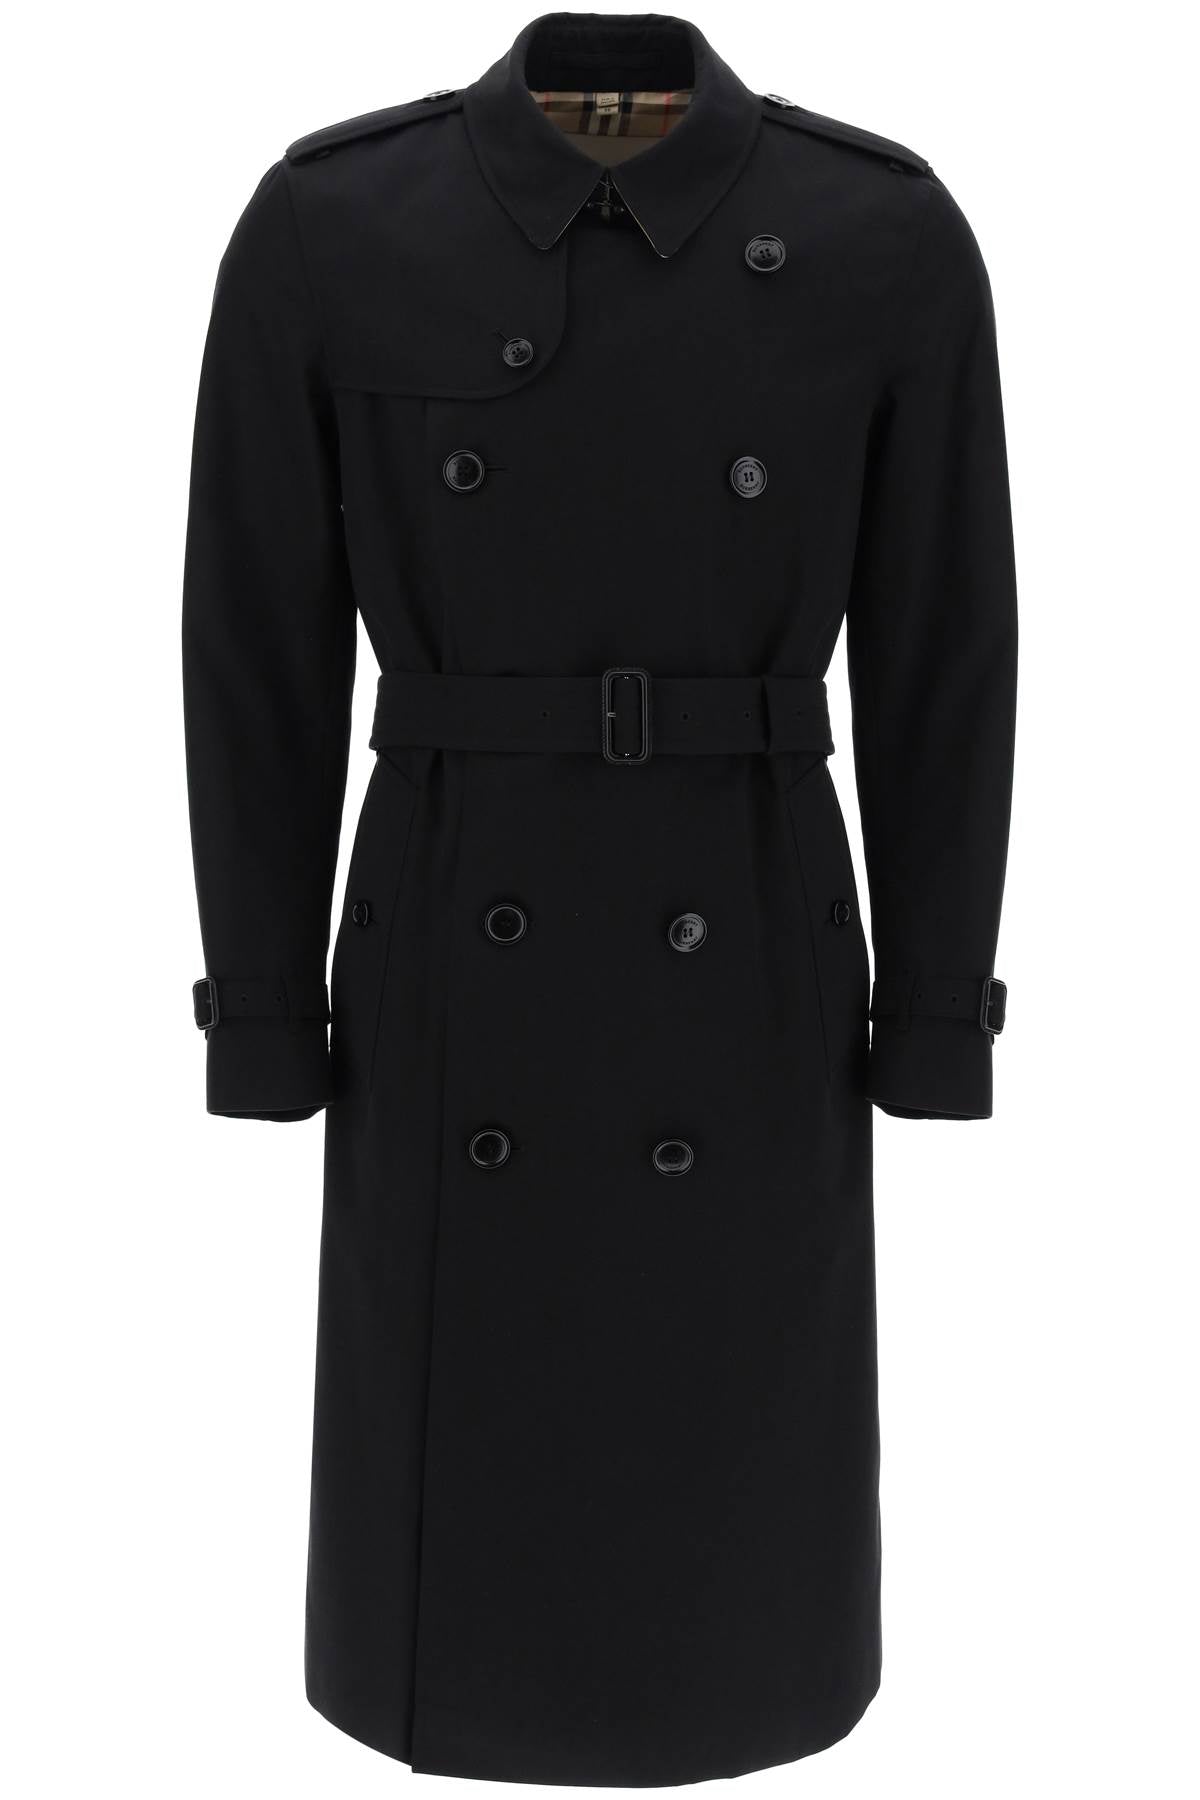 Classic Black Trench Coat for Men from Burberry's Heritage Collection